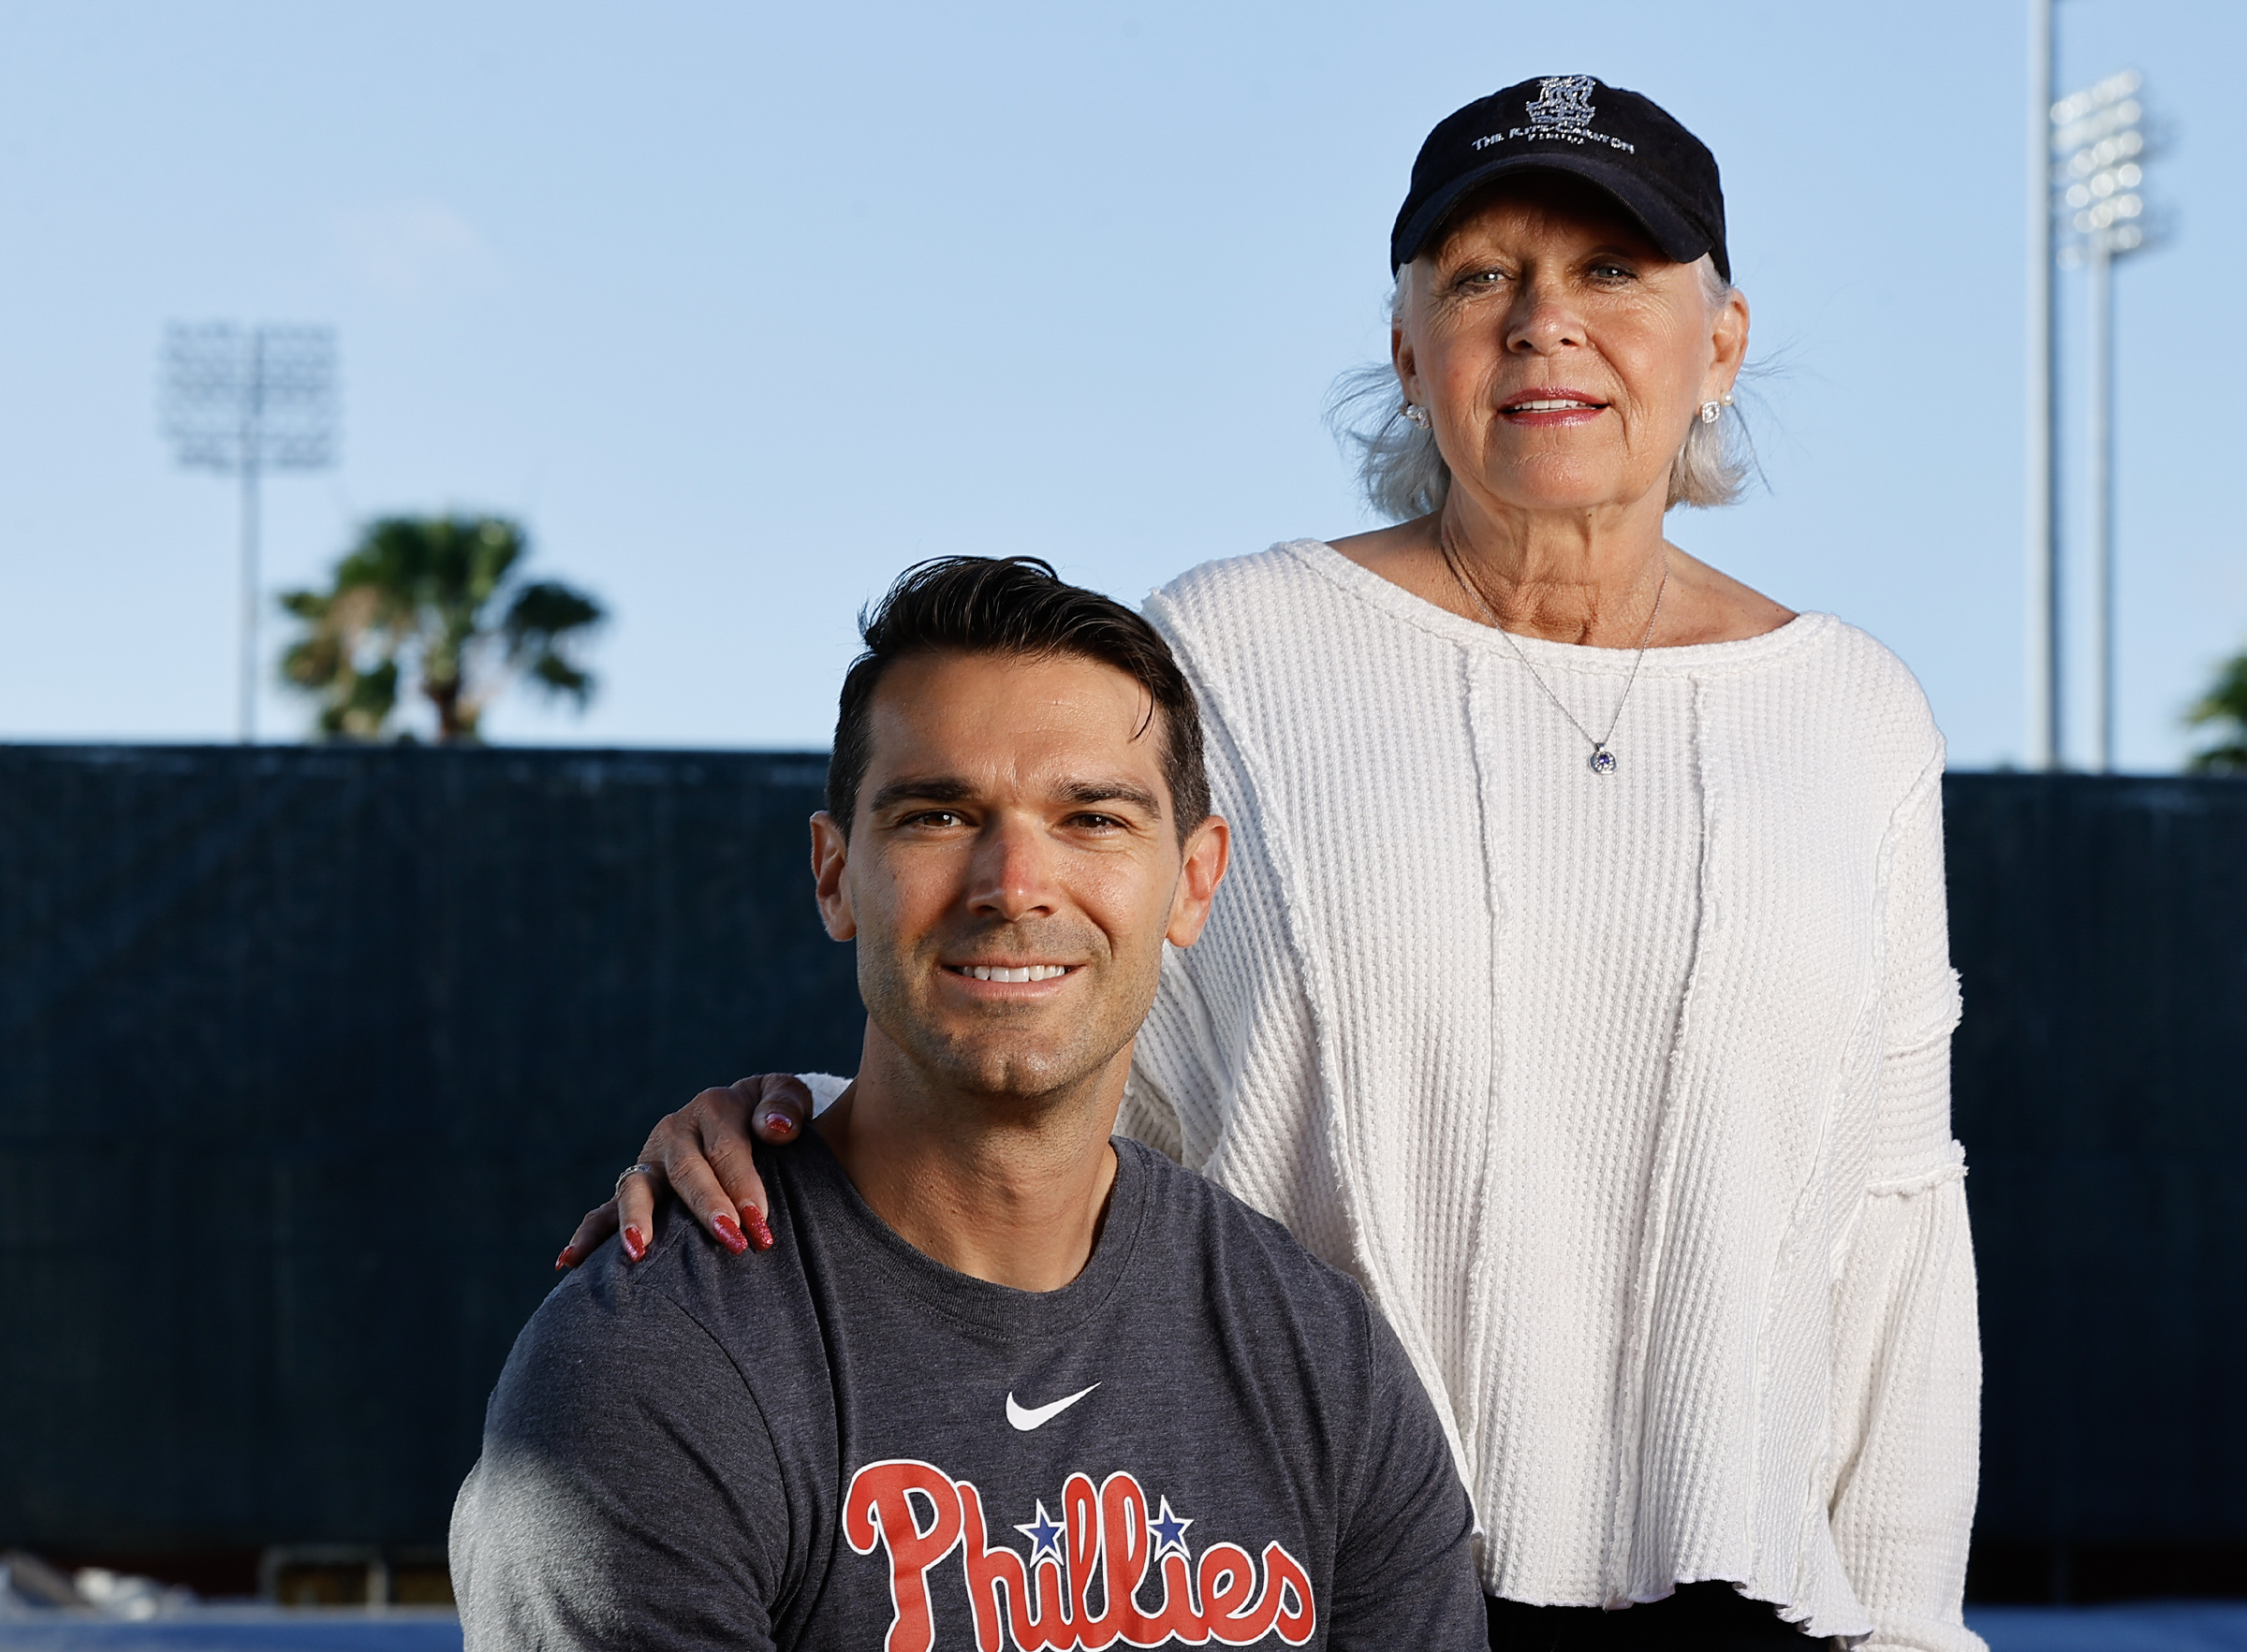 Phillies' Preston Mattingly helped his mother begin her 'second life